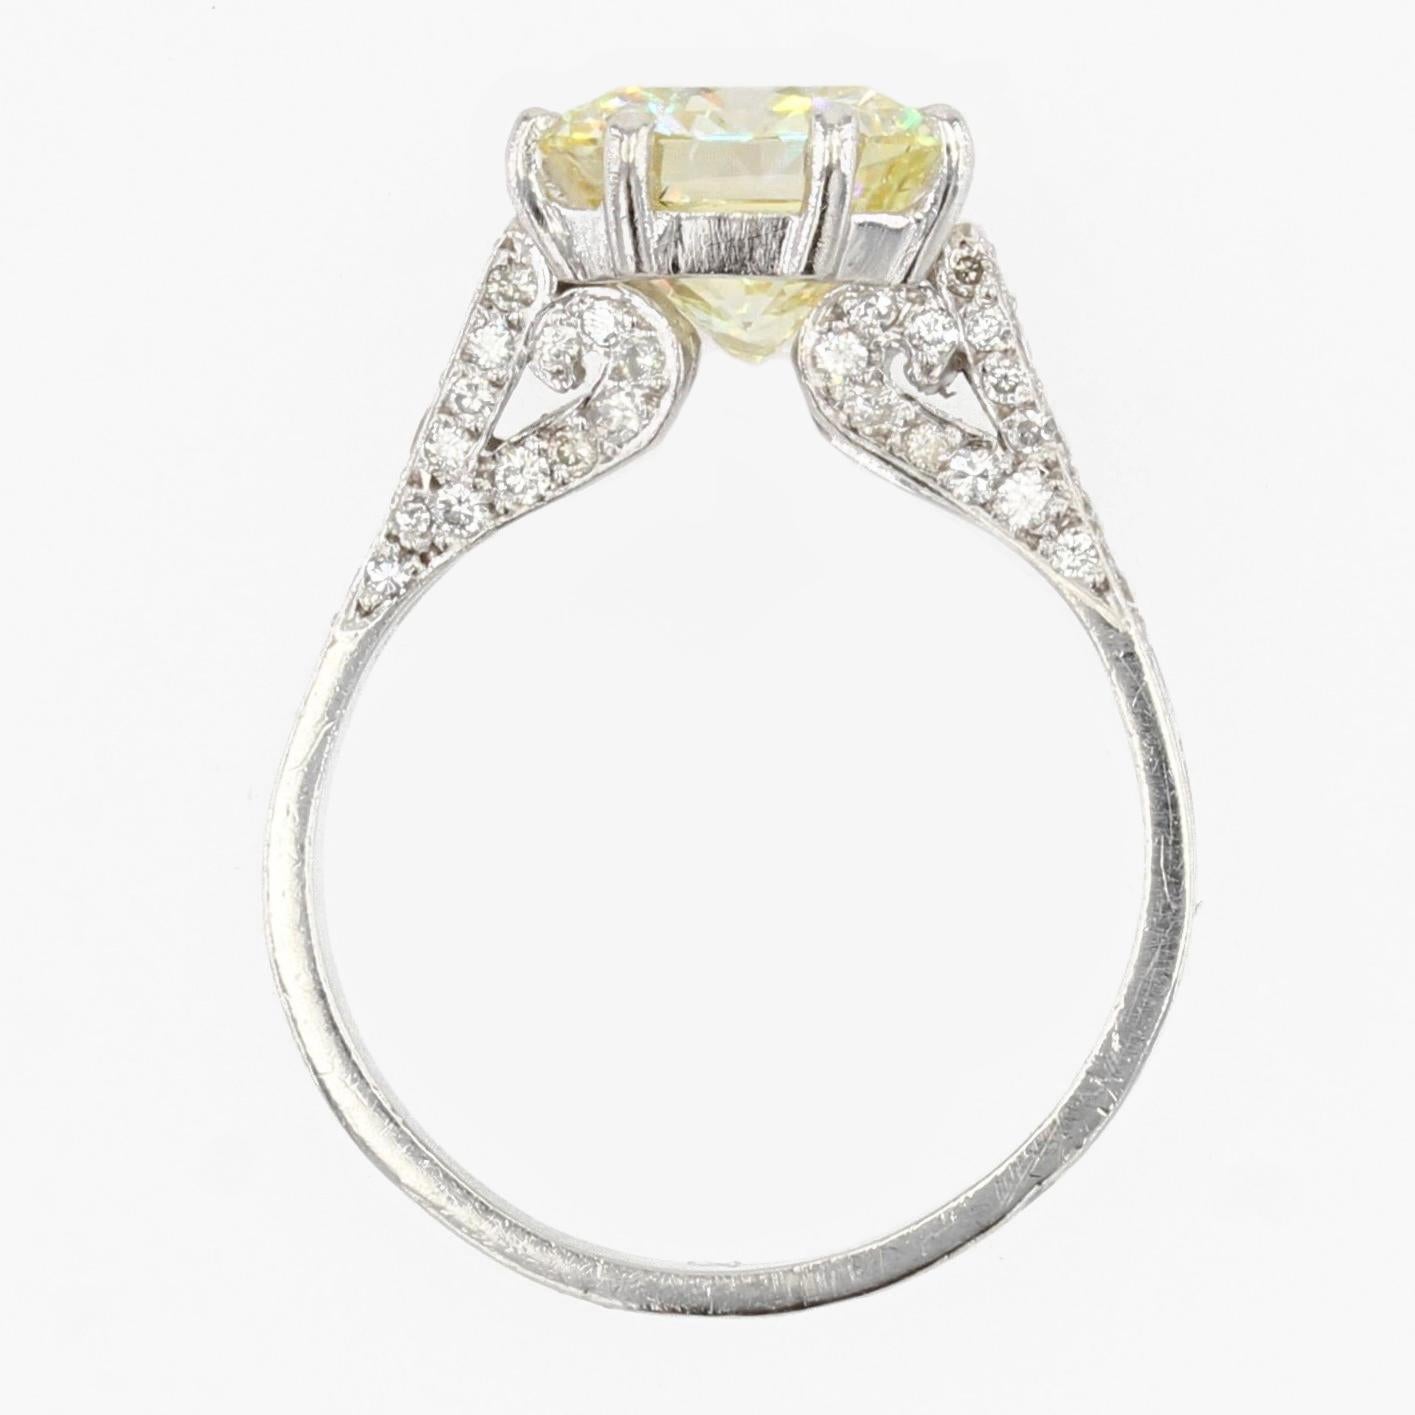 French 3.65 Carat Fancy Yellow Emerald Cut Diamond Platinum Ring For Sale 4